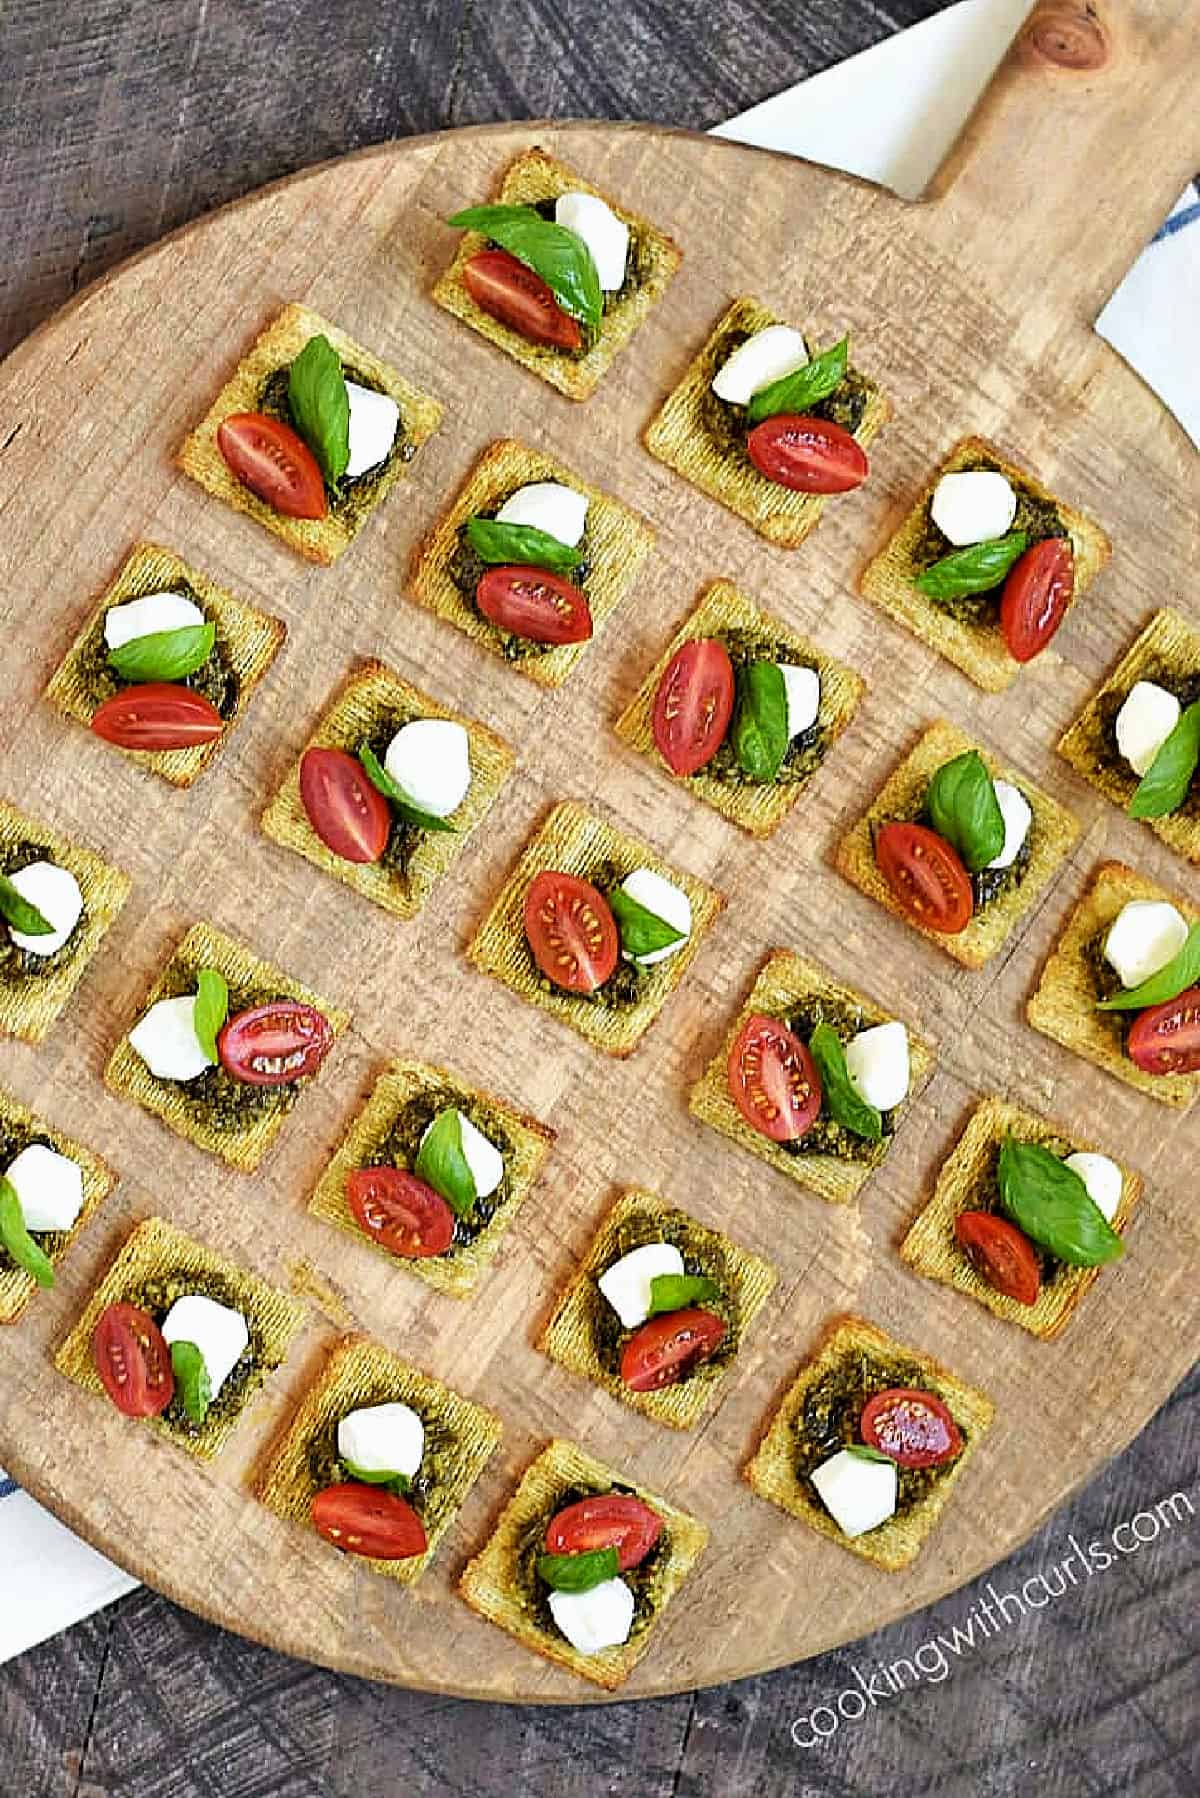 Twenty three crackers topped with basil pesto, mozzarella pearl, cherry tomato half, and basil leaf on a serving board.